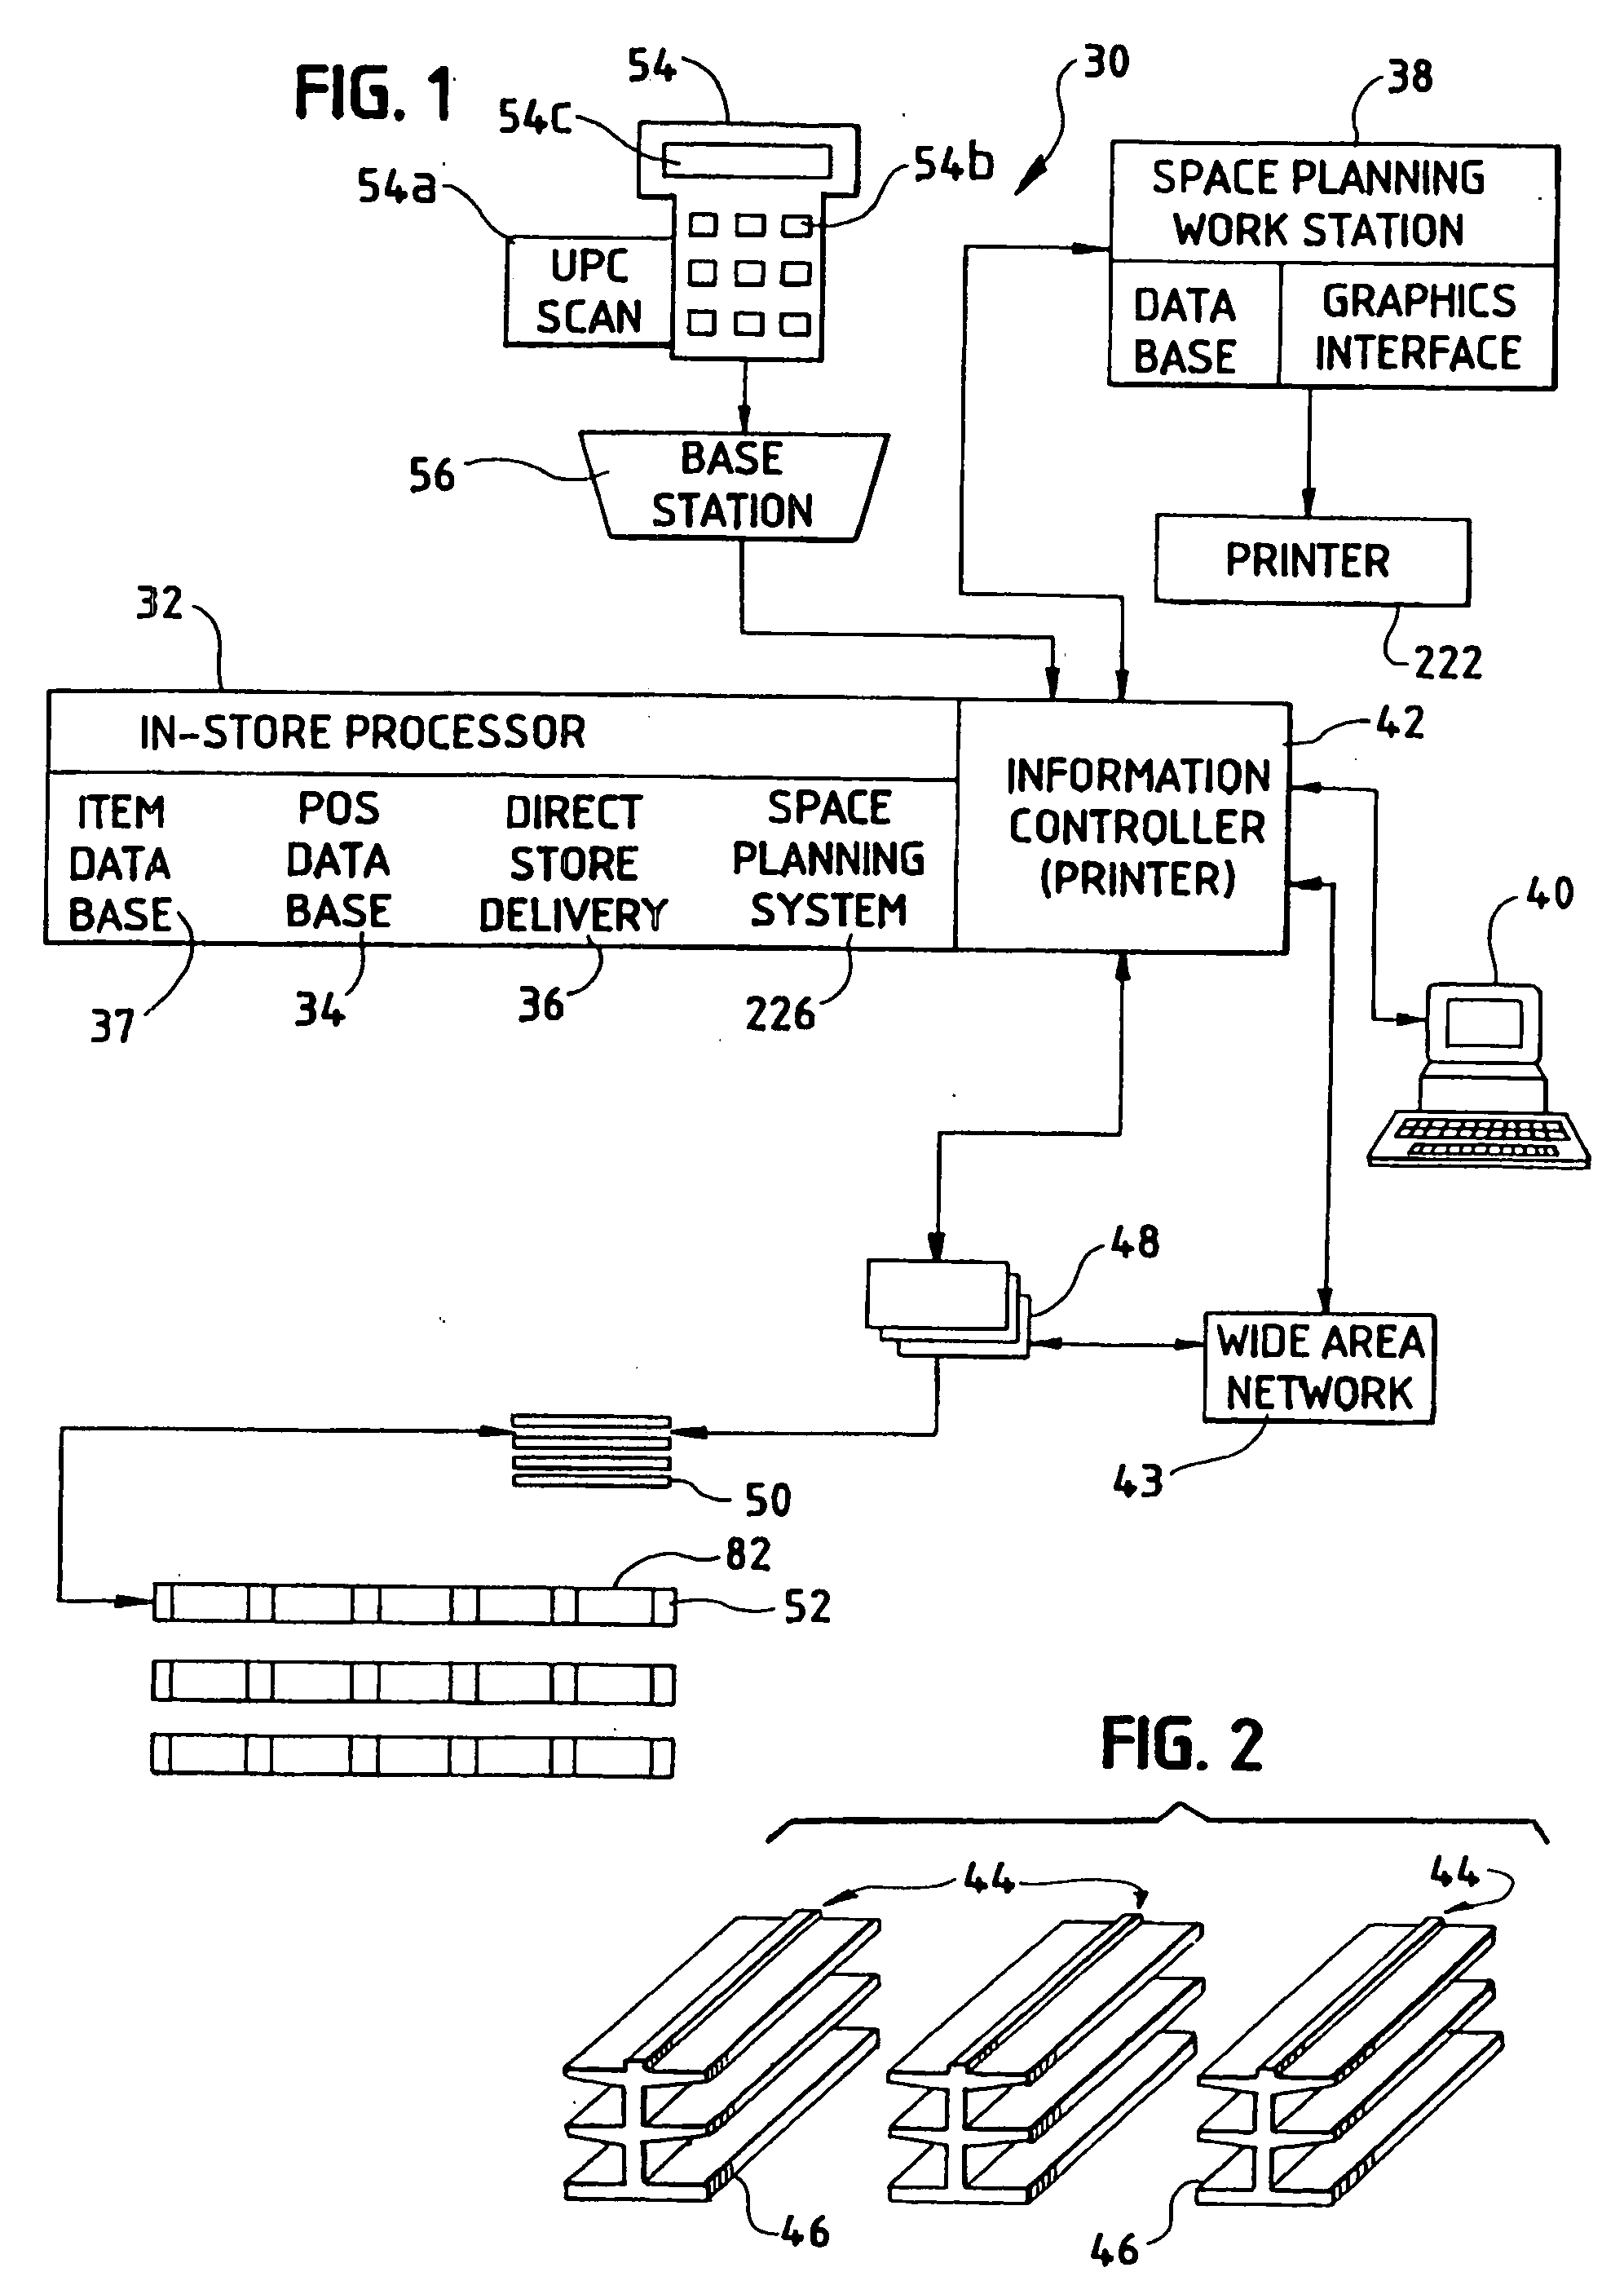 Electronic product information display system